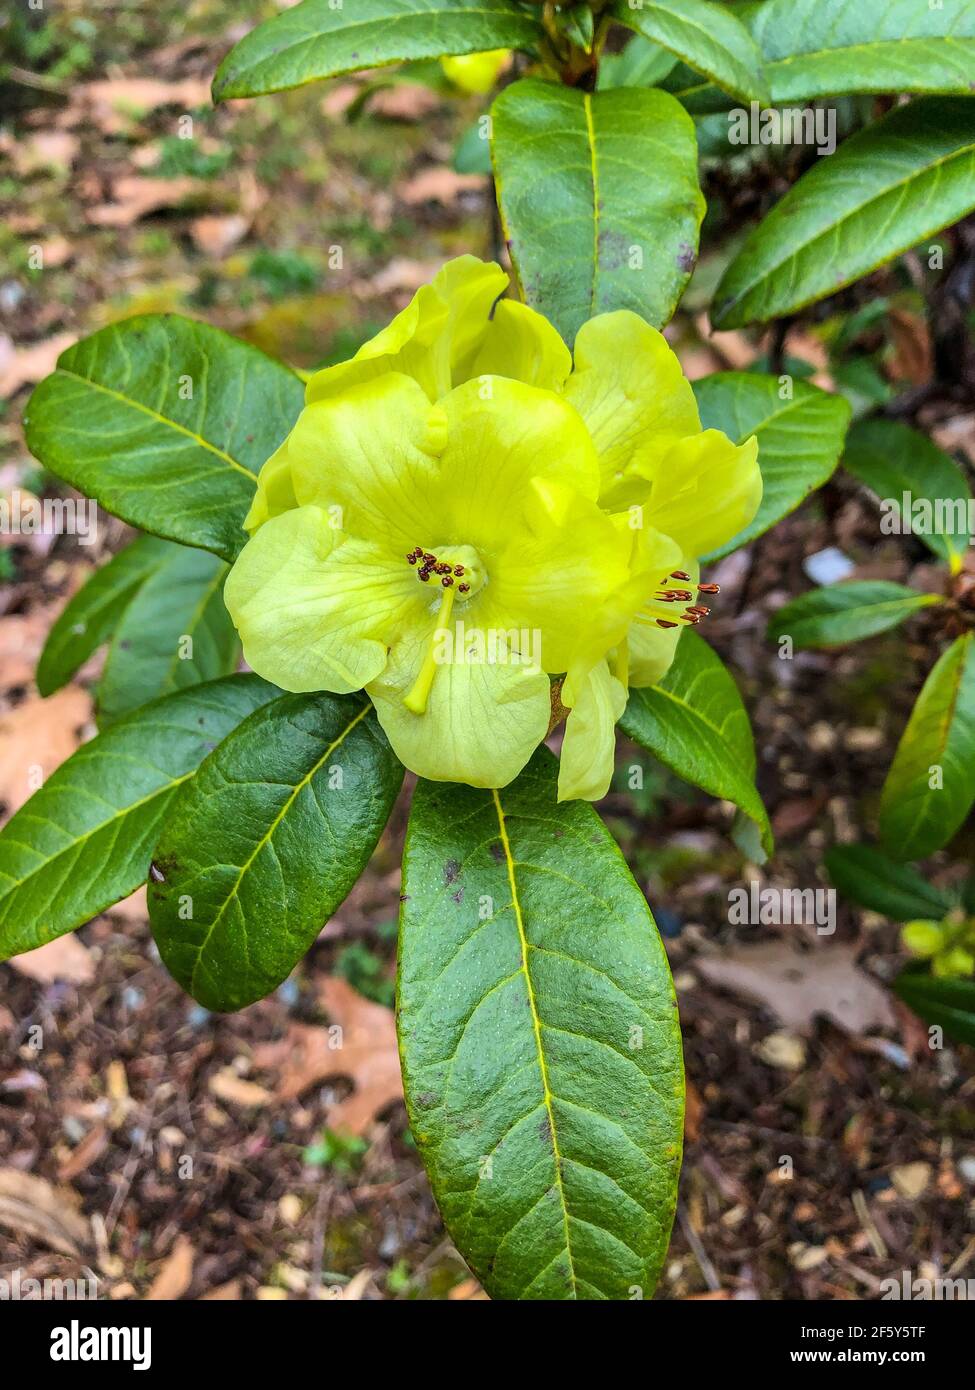 Rhododendron luteiflorum is broadleaf evergreen shrub, small, compact, rounded. Leaves simple, alternate, lanceolate, oblanceolate or oblong-lanceolat Stock Photo